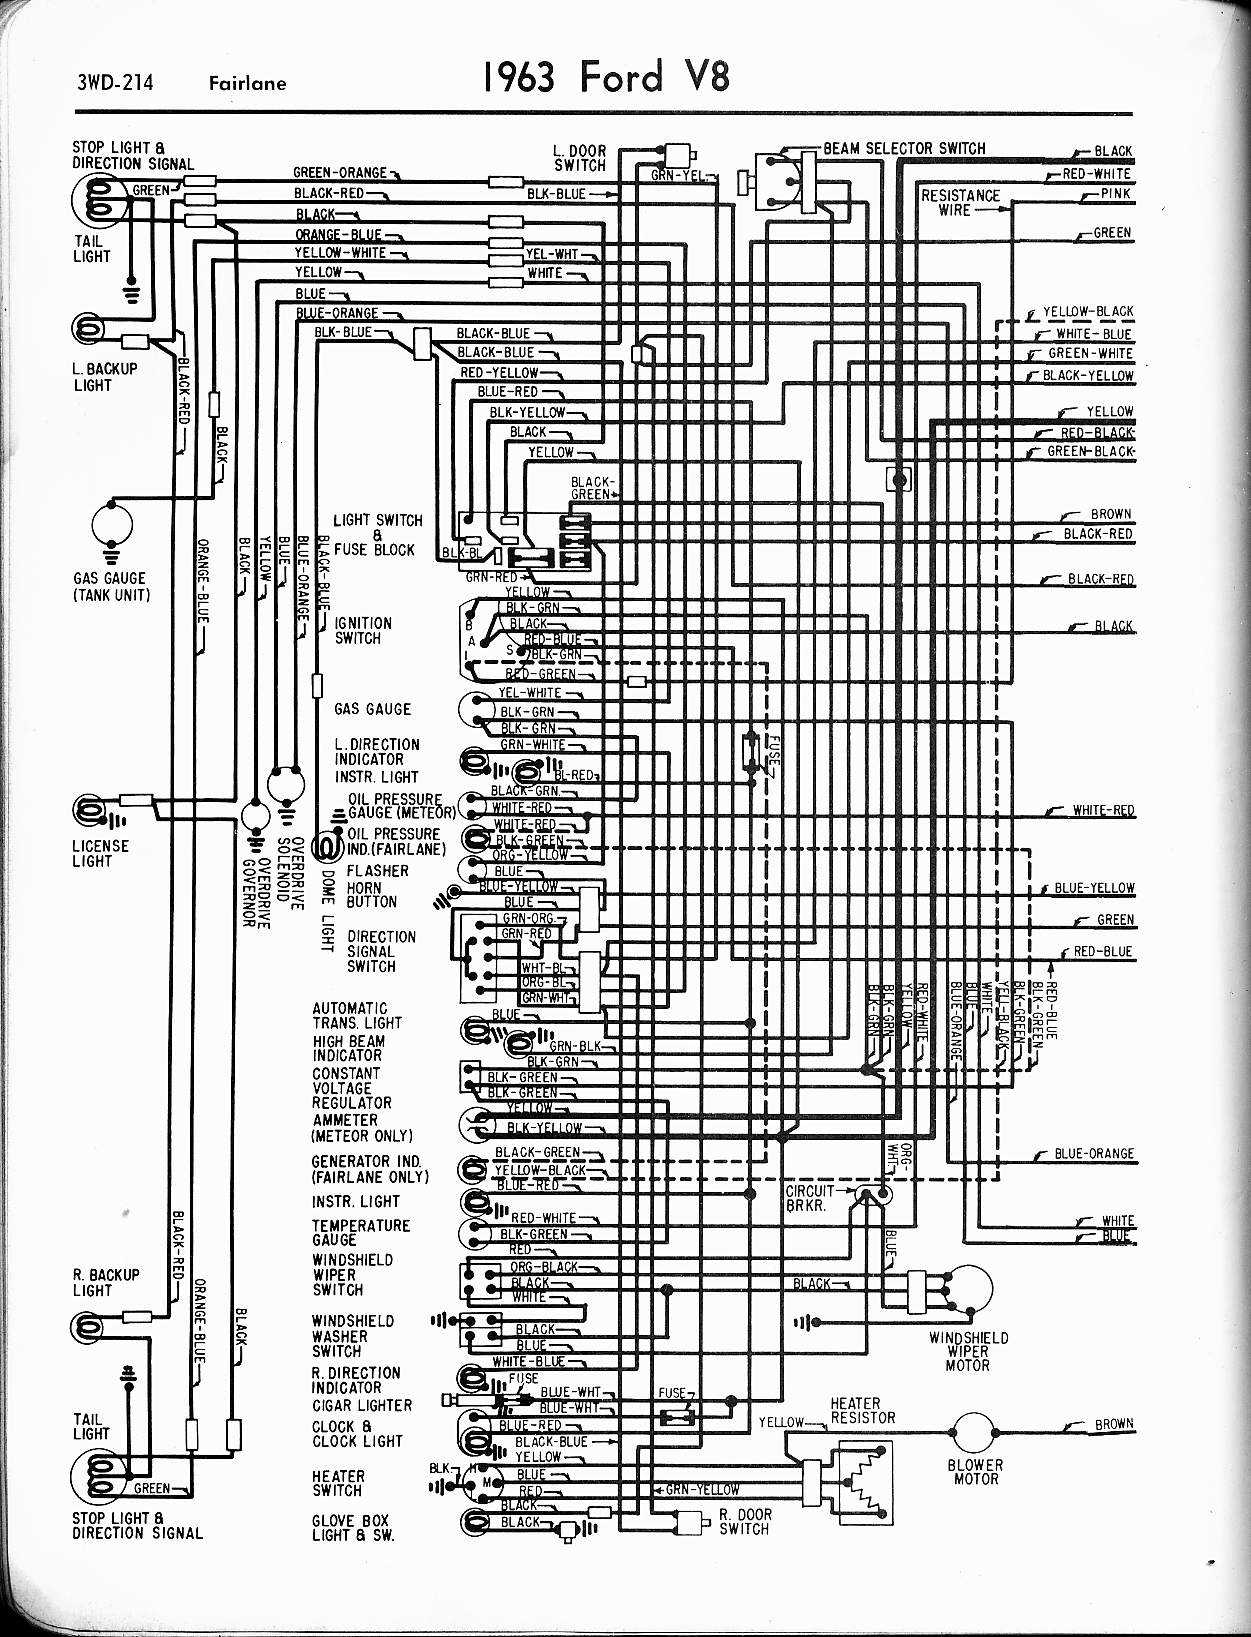 1930 Model A Ford Wiring Diagram from www.oldcarmanualproject.com